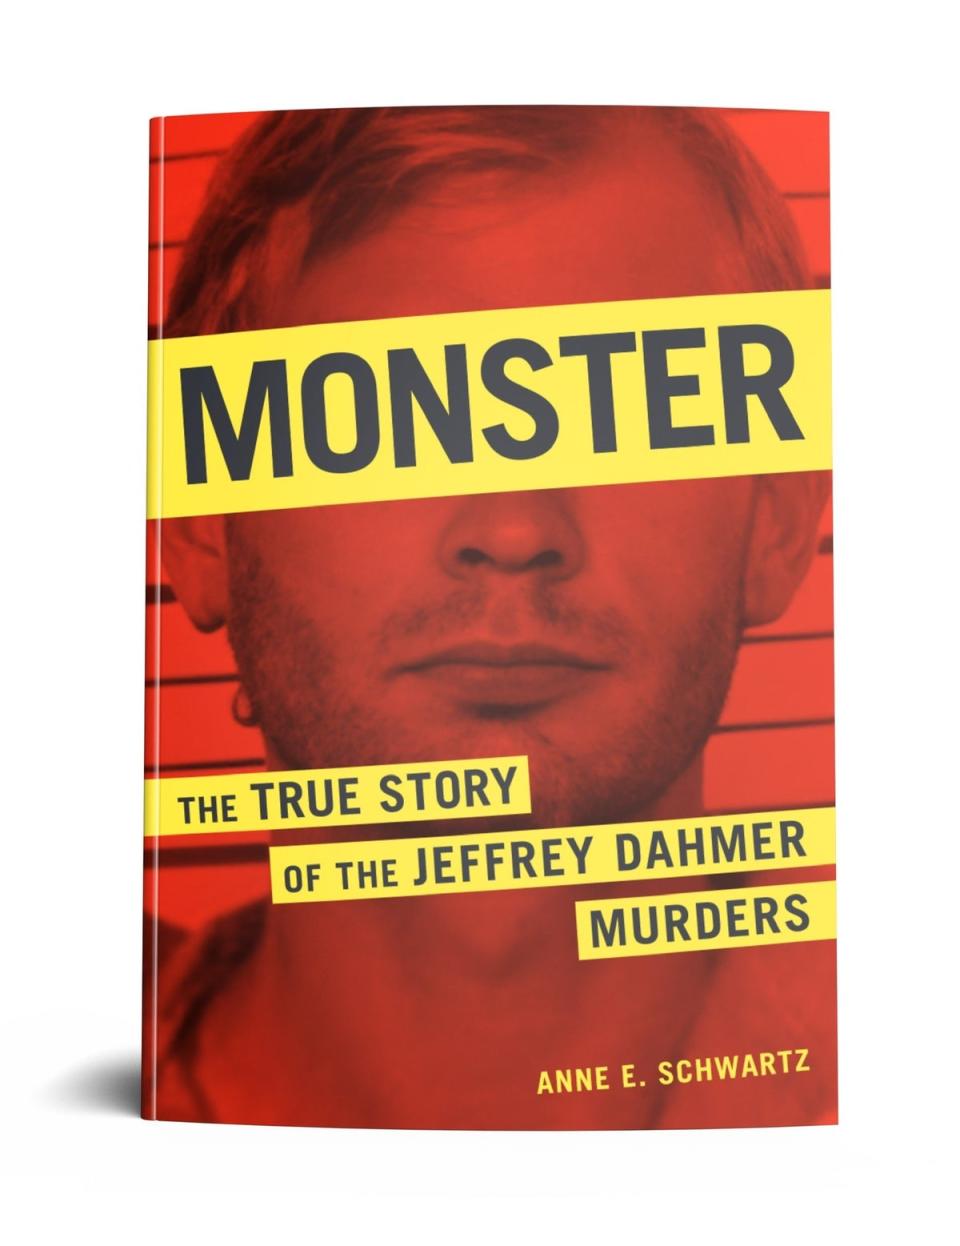 Monster: The True Story of Jeffrey Dahmer’s Murders is an updated version of Anne E. Schwartz’s 1991 bestselling book (Union Square Publishing)